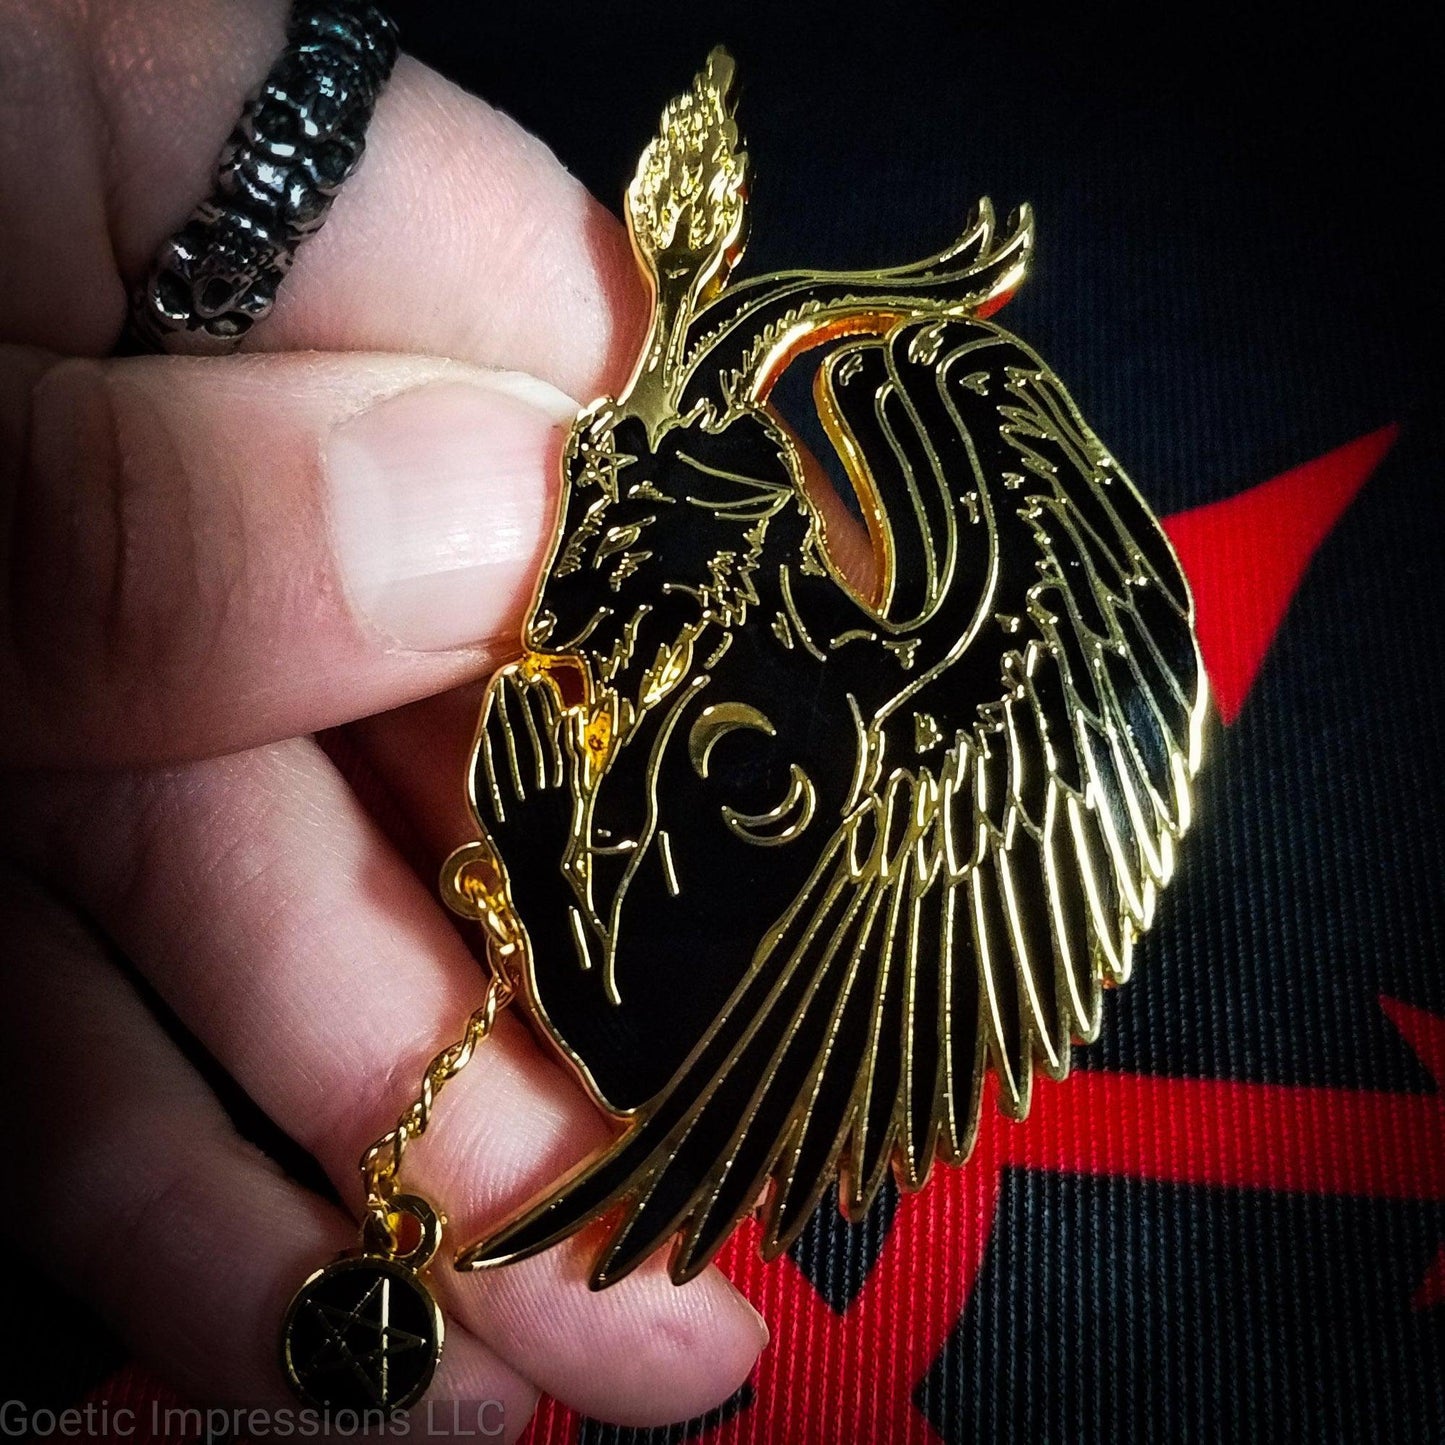 A hand holding a black and gold hard enamel pin featuring Baphomet in a side profile praying pose. There is a pentacle chain rosary in Baphomet's hands.